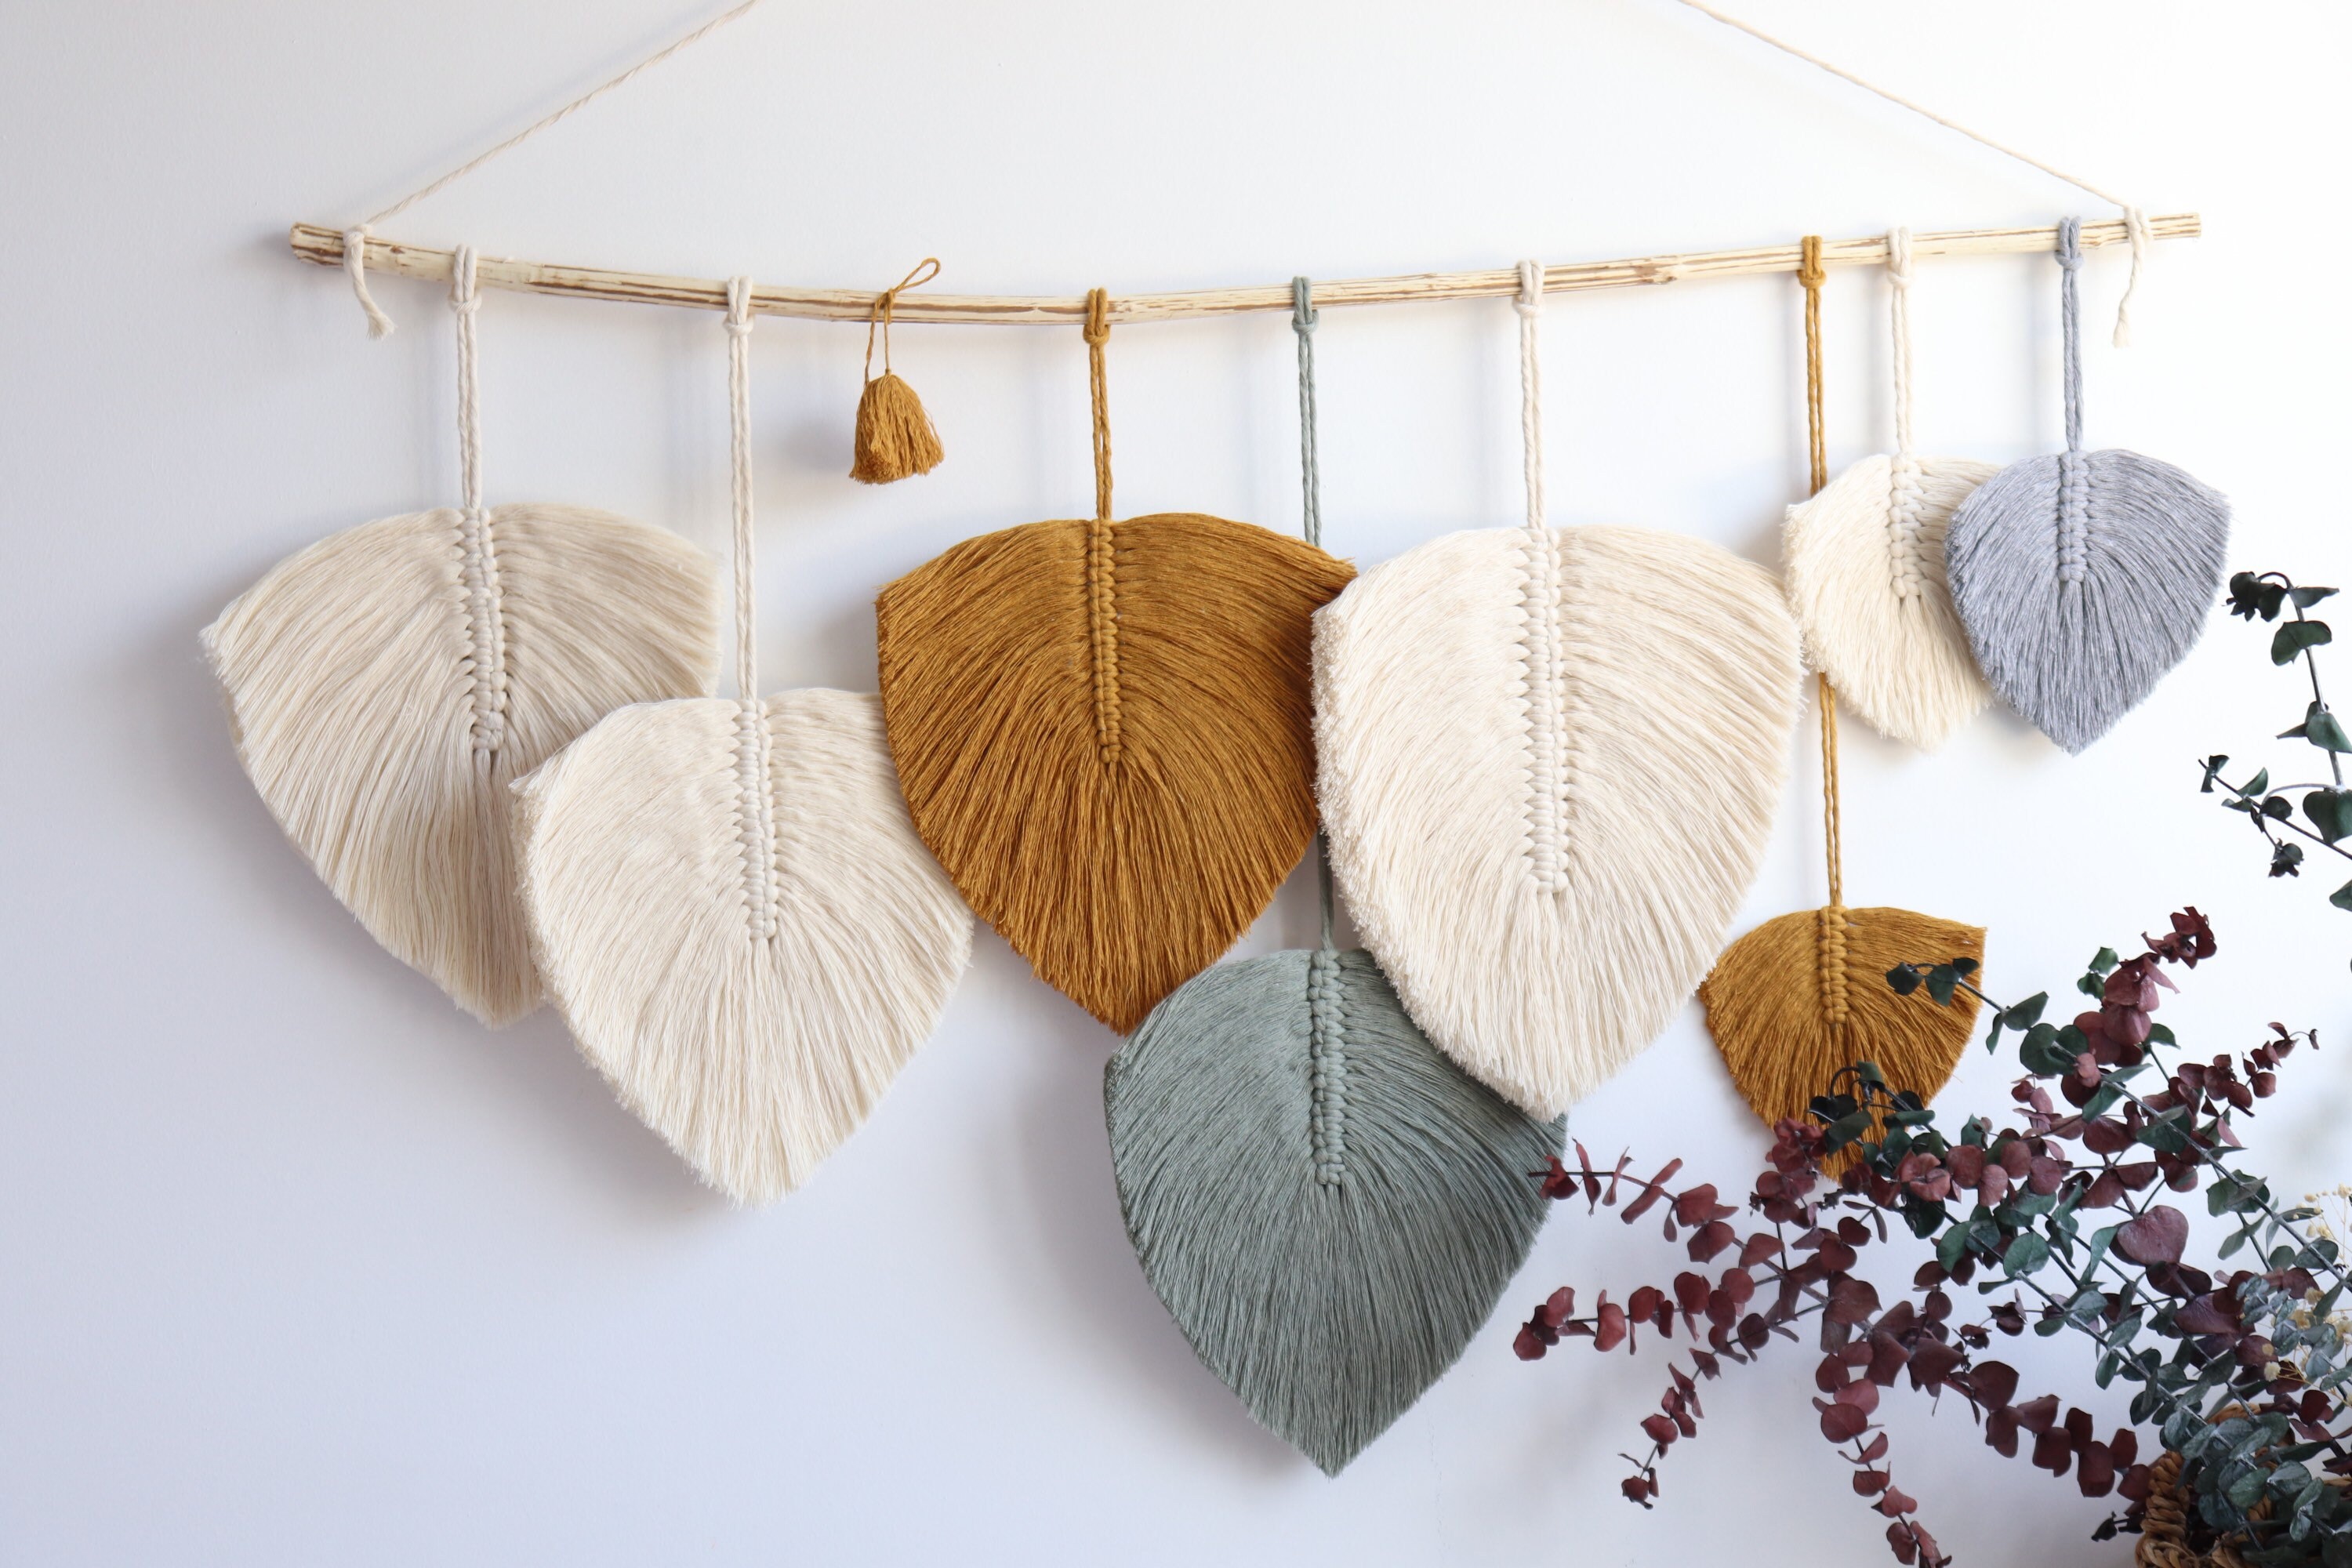 LARGE Custom Macrame Feather Wall Hanging with 100% Cotton Cords for Boho Knotted Rope Feathers or Leaves Wall Decor